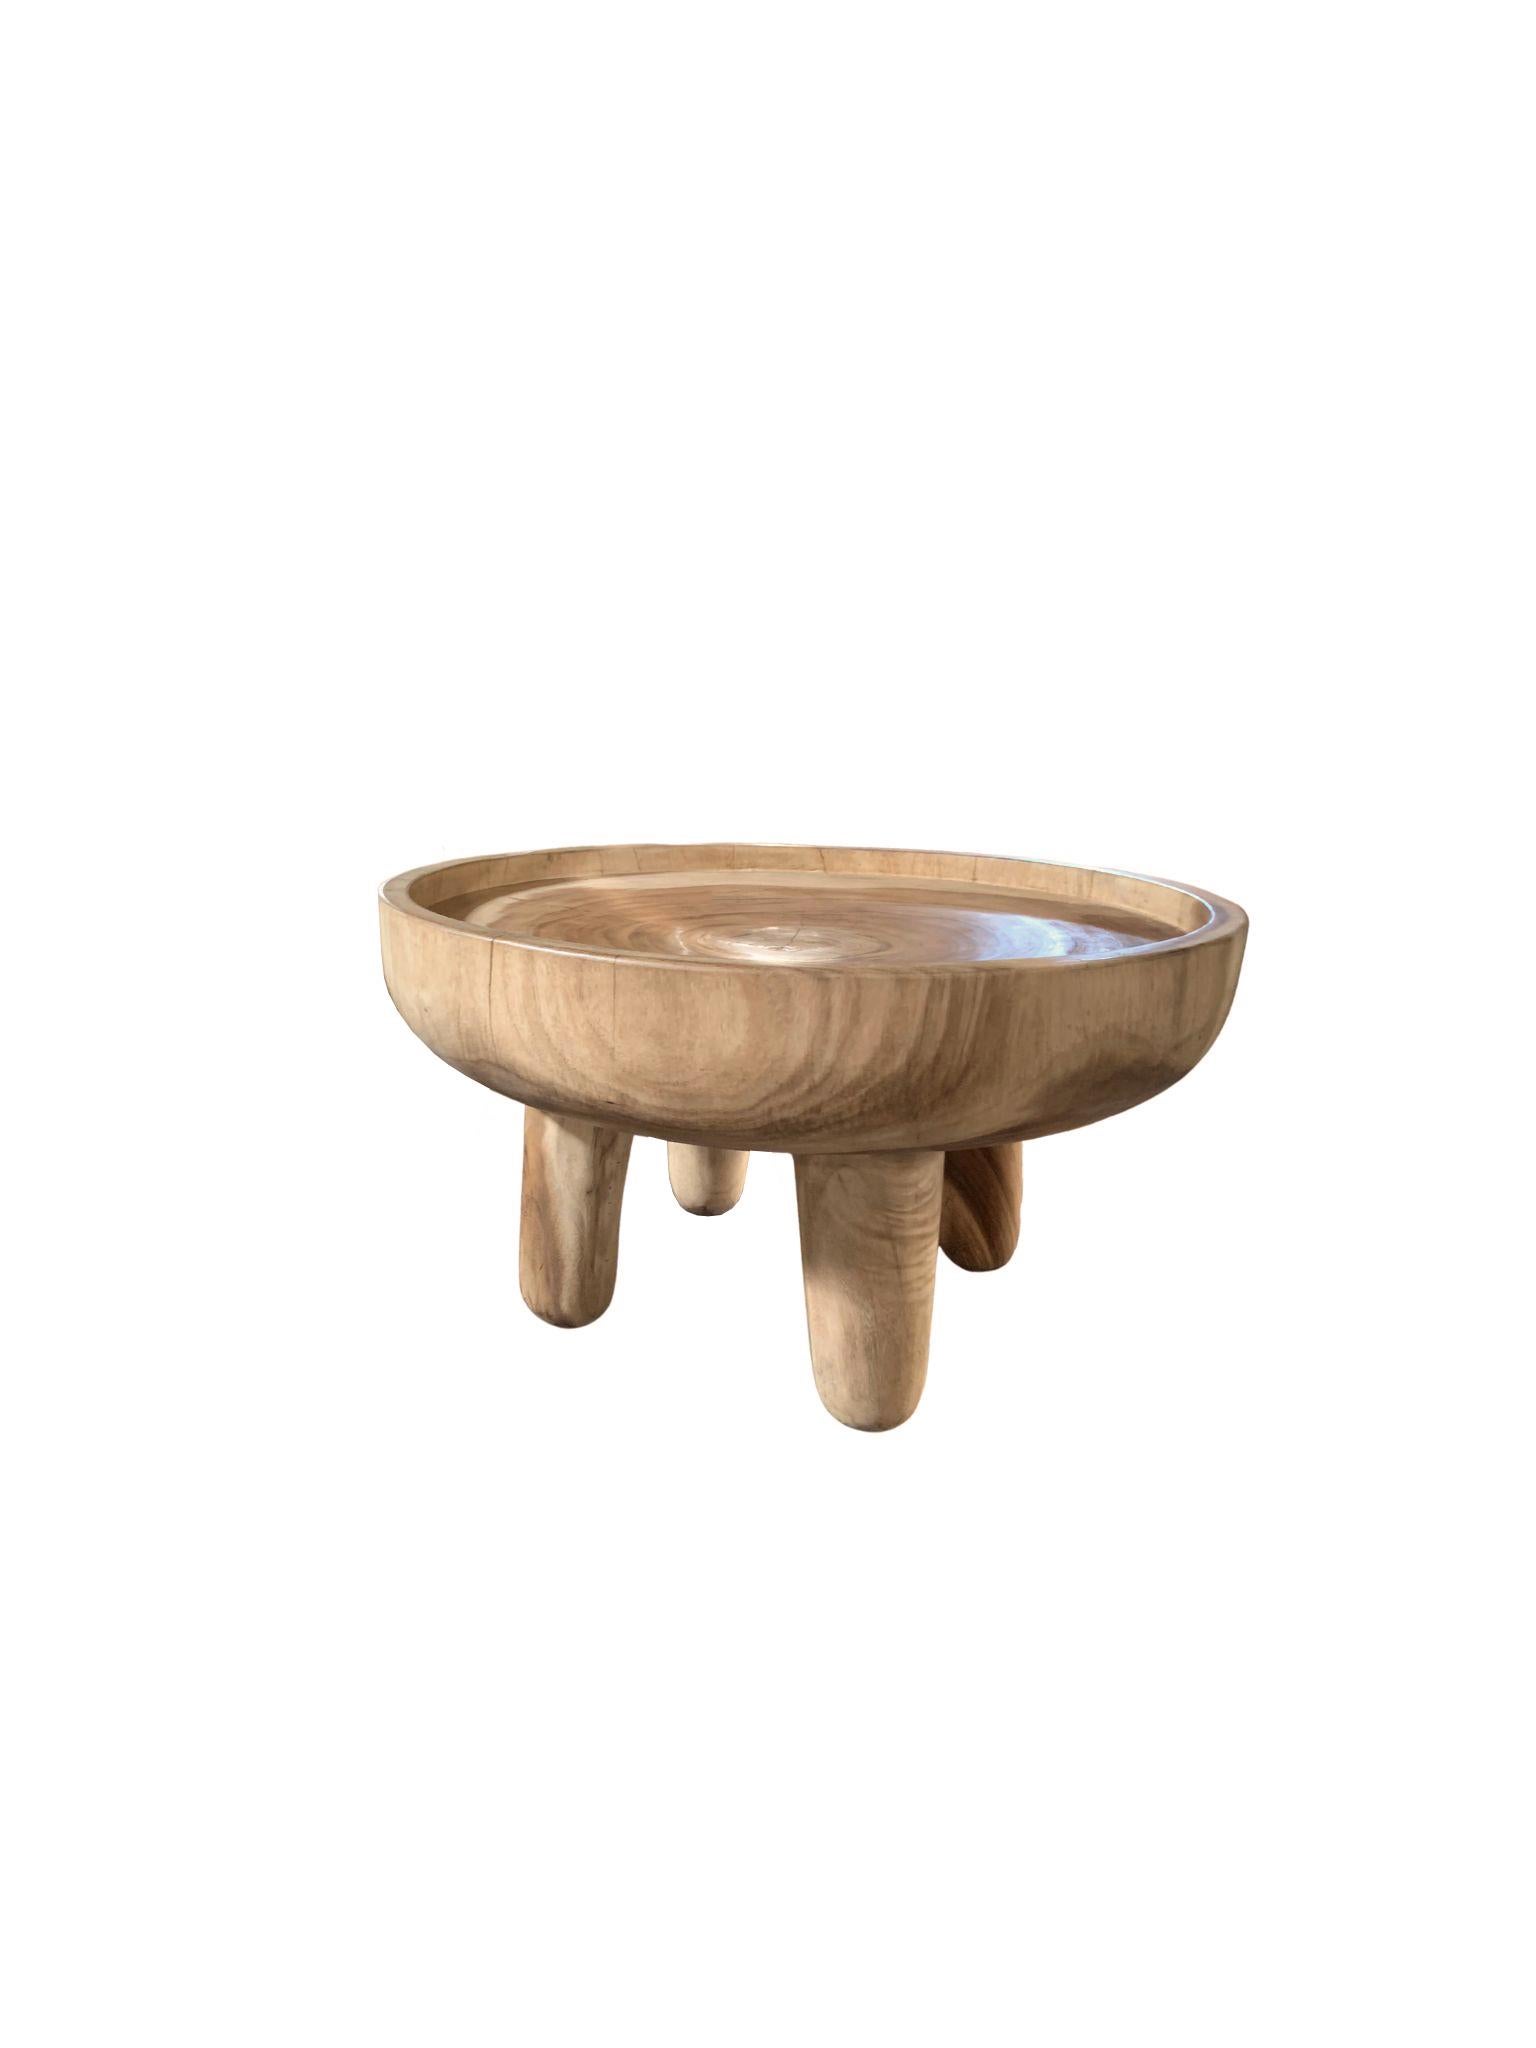 Organic Modern Sculptural Round Side Table Solid Mango Wood Modern Organic For Sale